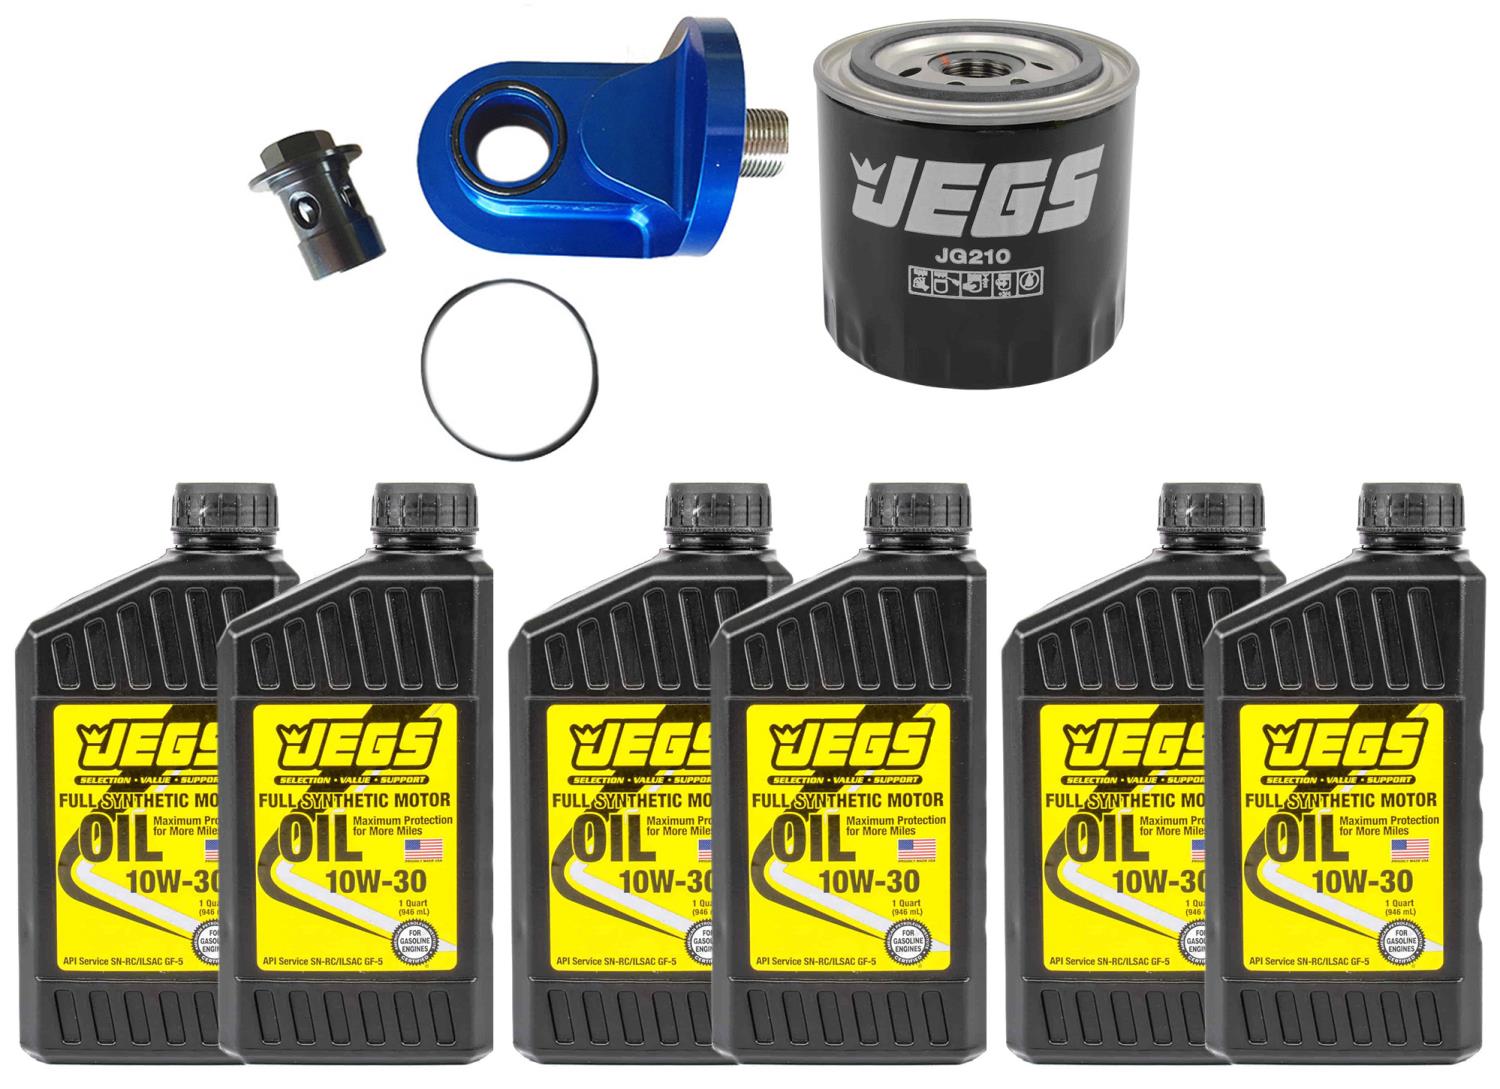 90-Degree Oil Filter Adapter, Oil Filter, and 10W30 Oil Kit for Ford Small/Big Block Pushrod V8